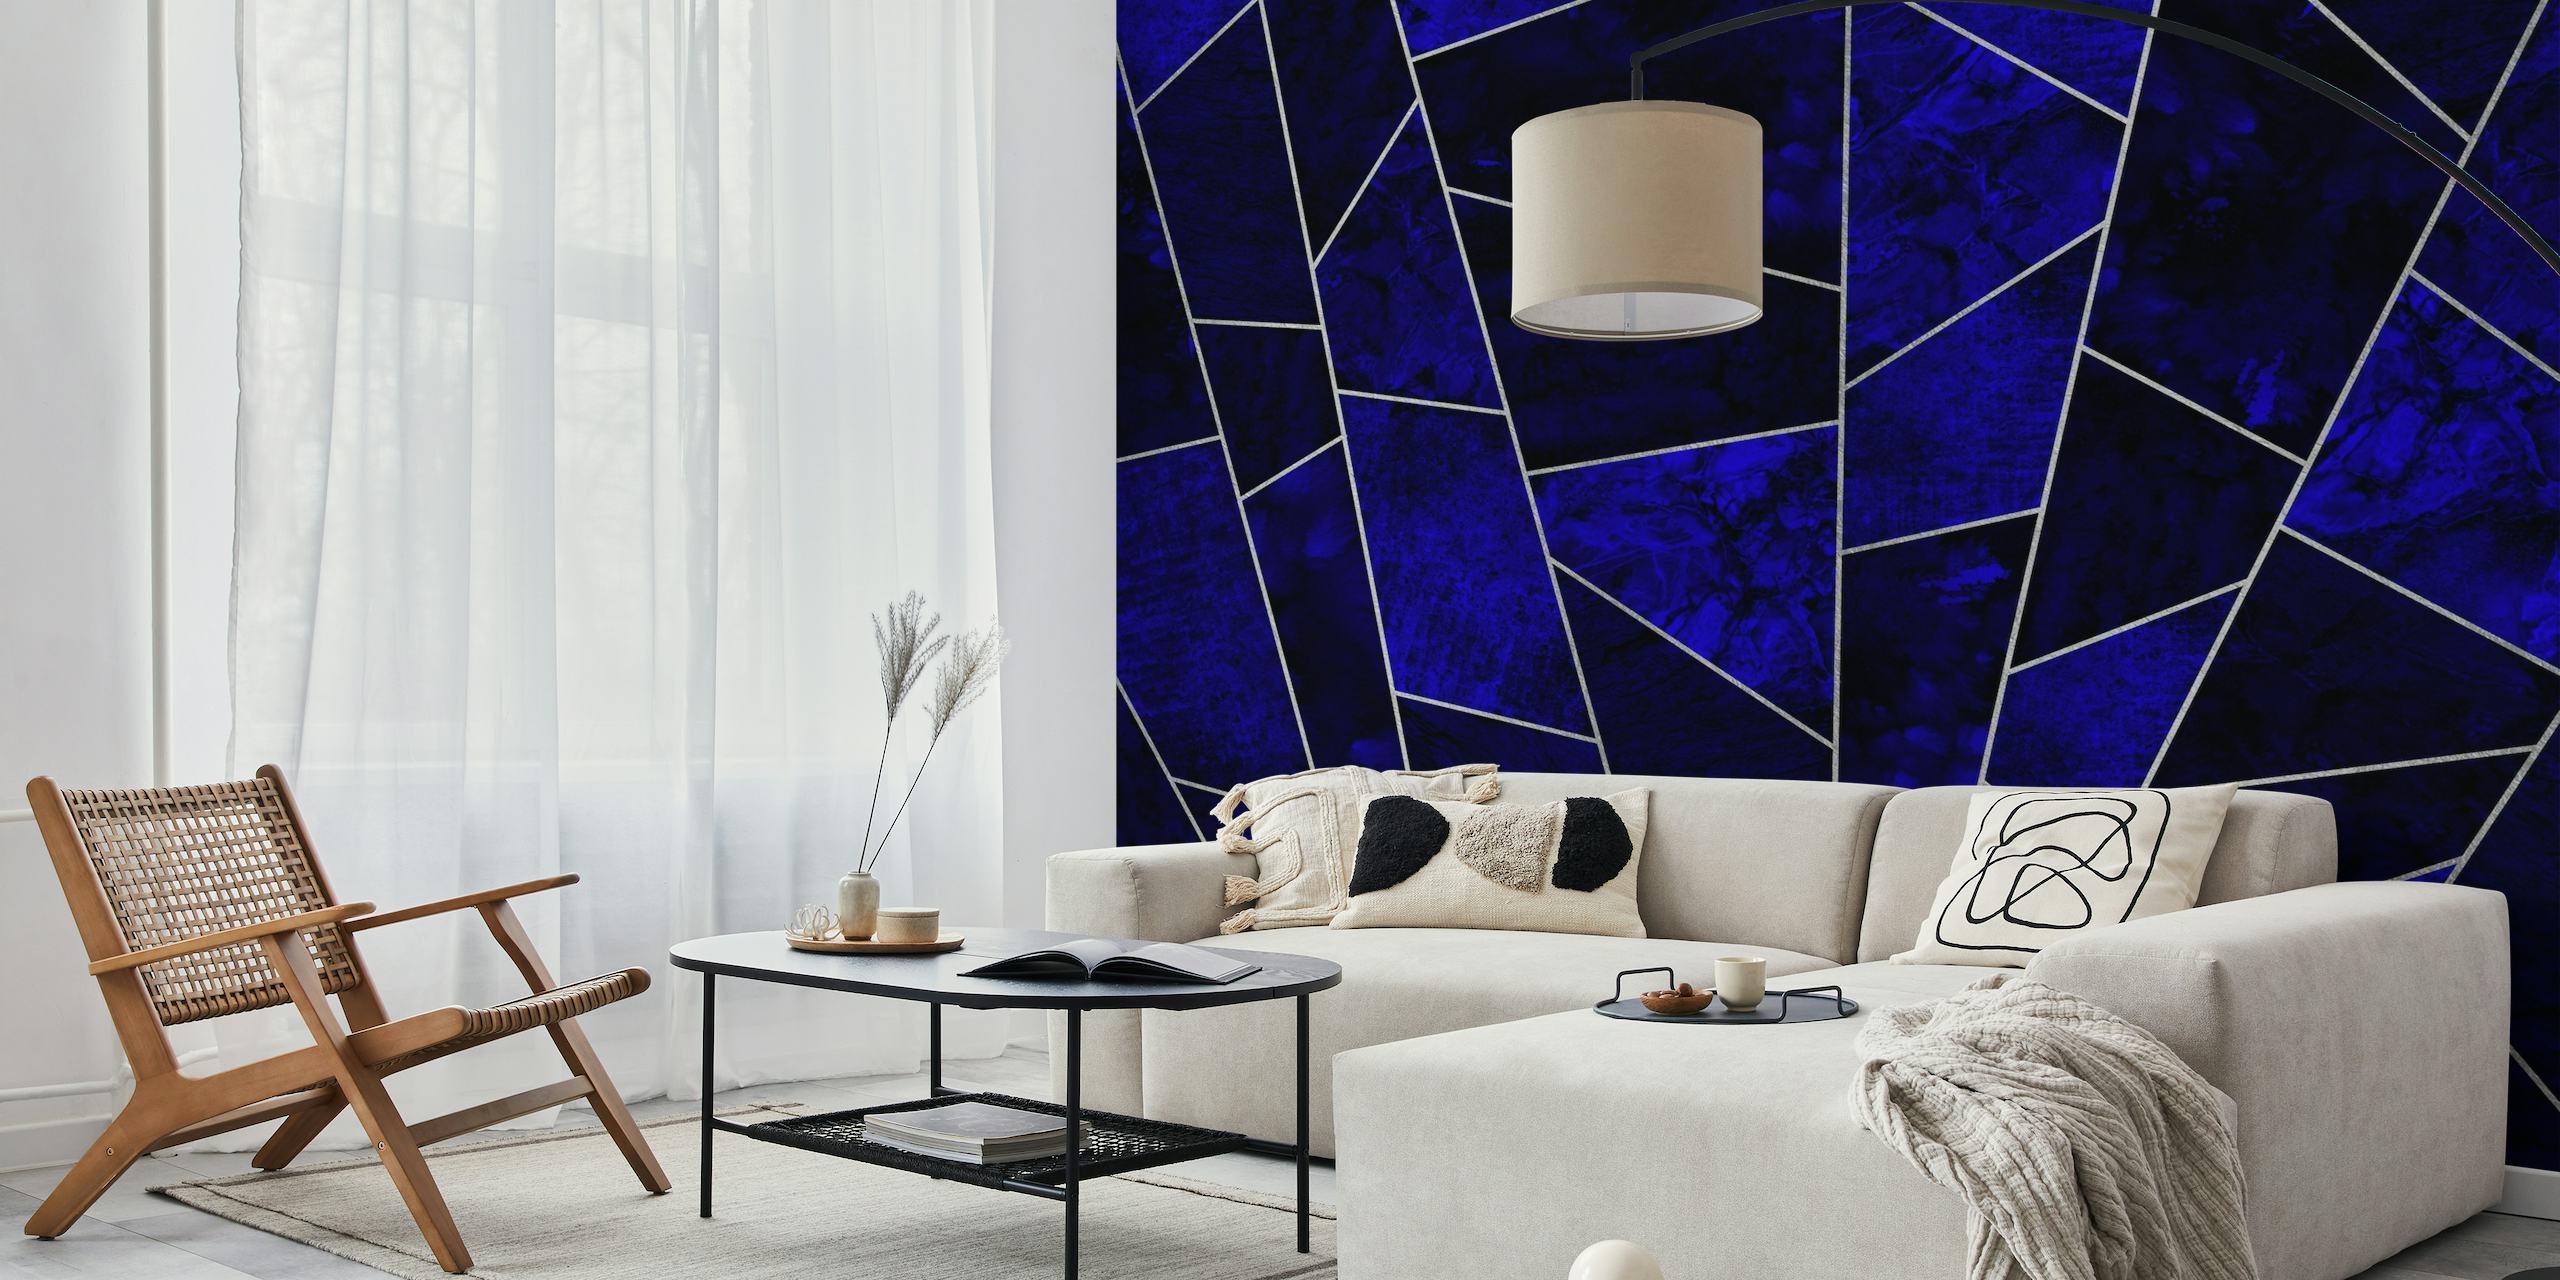 Elegant deep blue sapphire tile pattern with silver accents wall mural